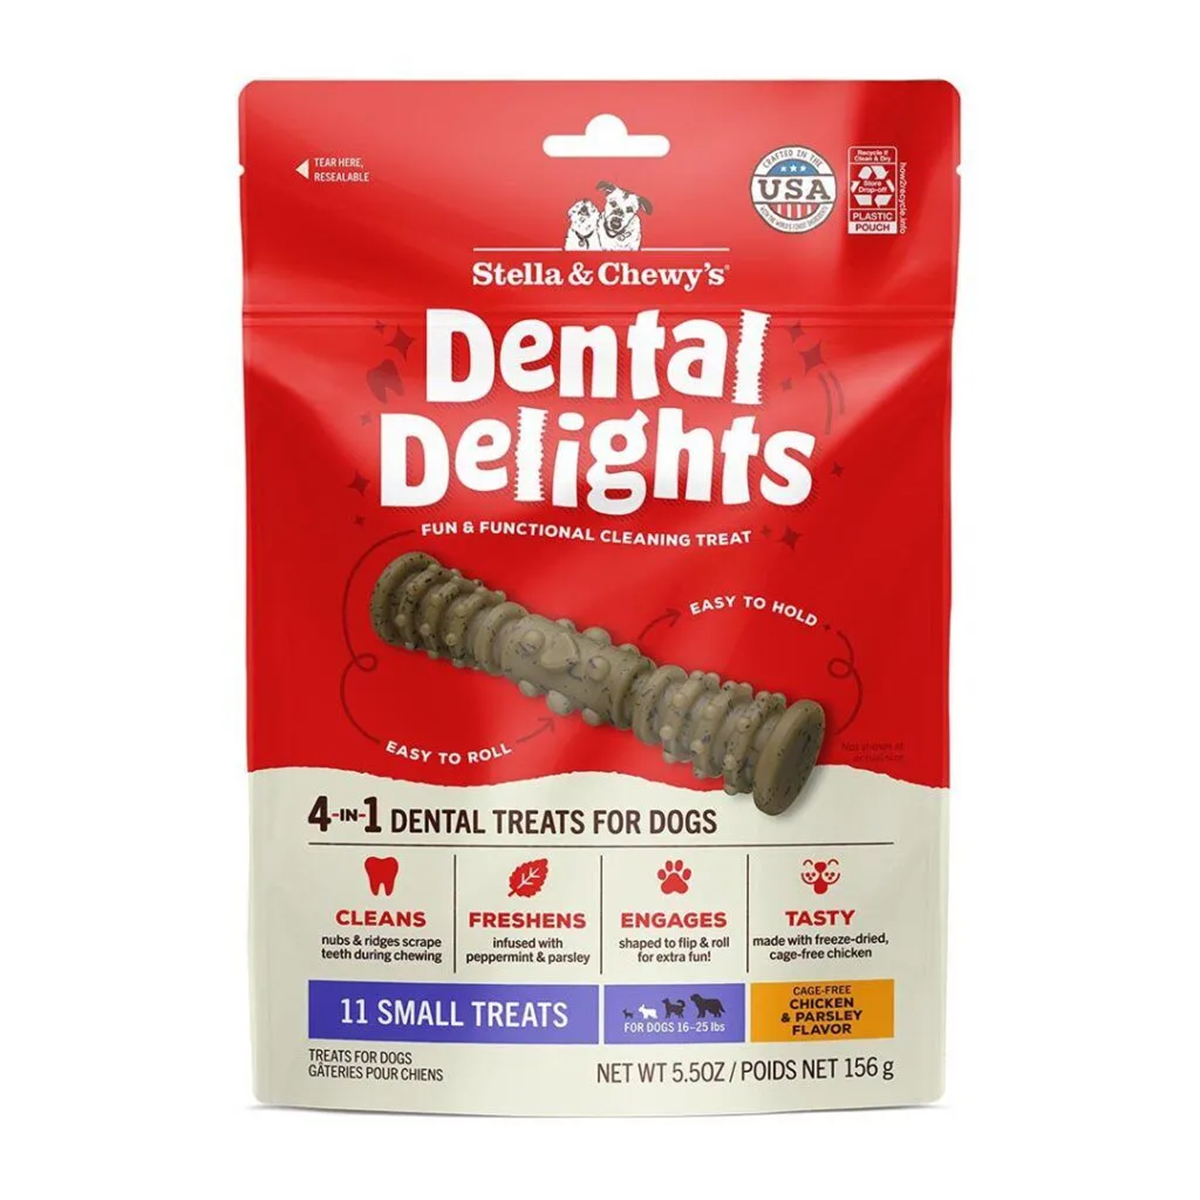 Stella & Chewy's Dental Delights Dog Treats - Small